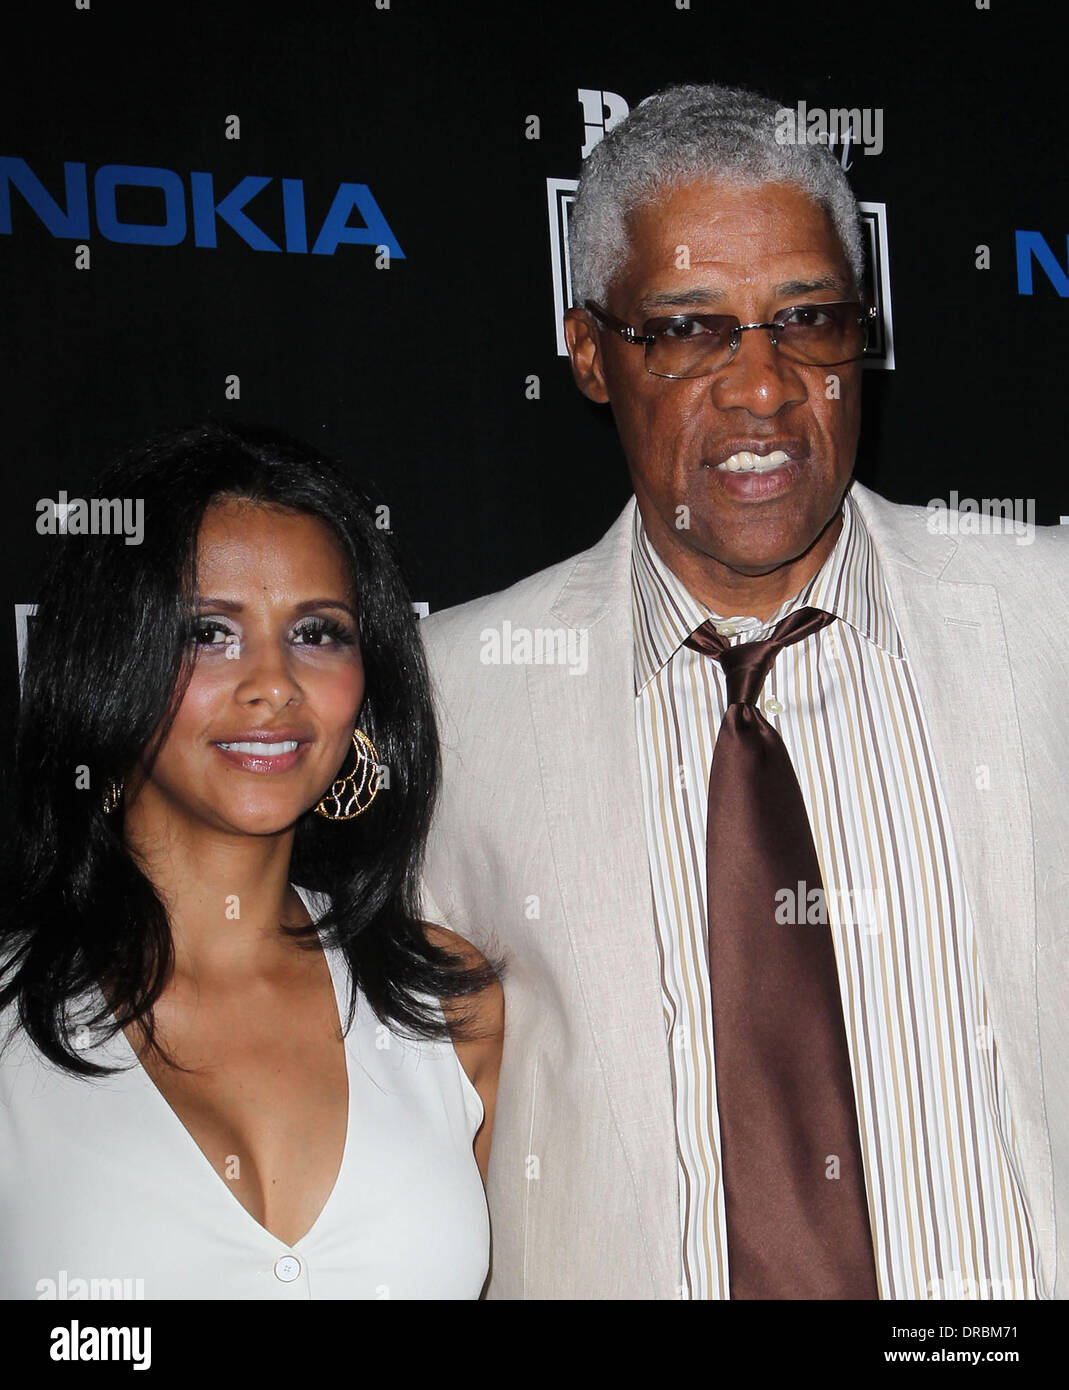 Julius “Dr J” Erving and Wife Dory   - Atlanta  Entertainment Industry News & Gossip